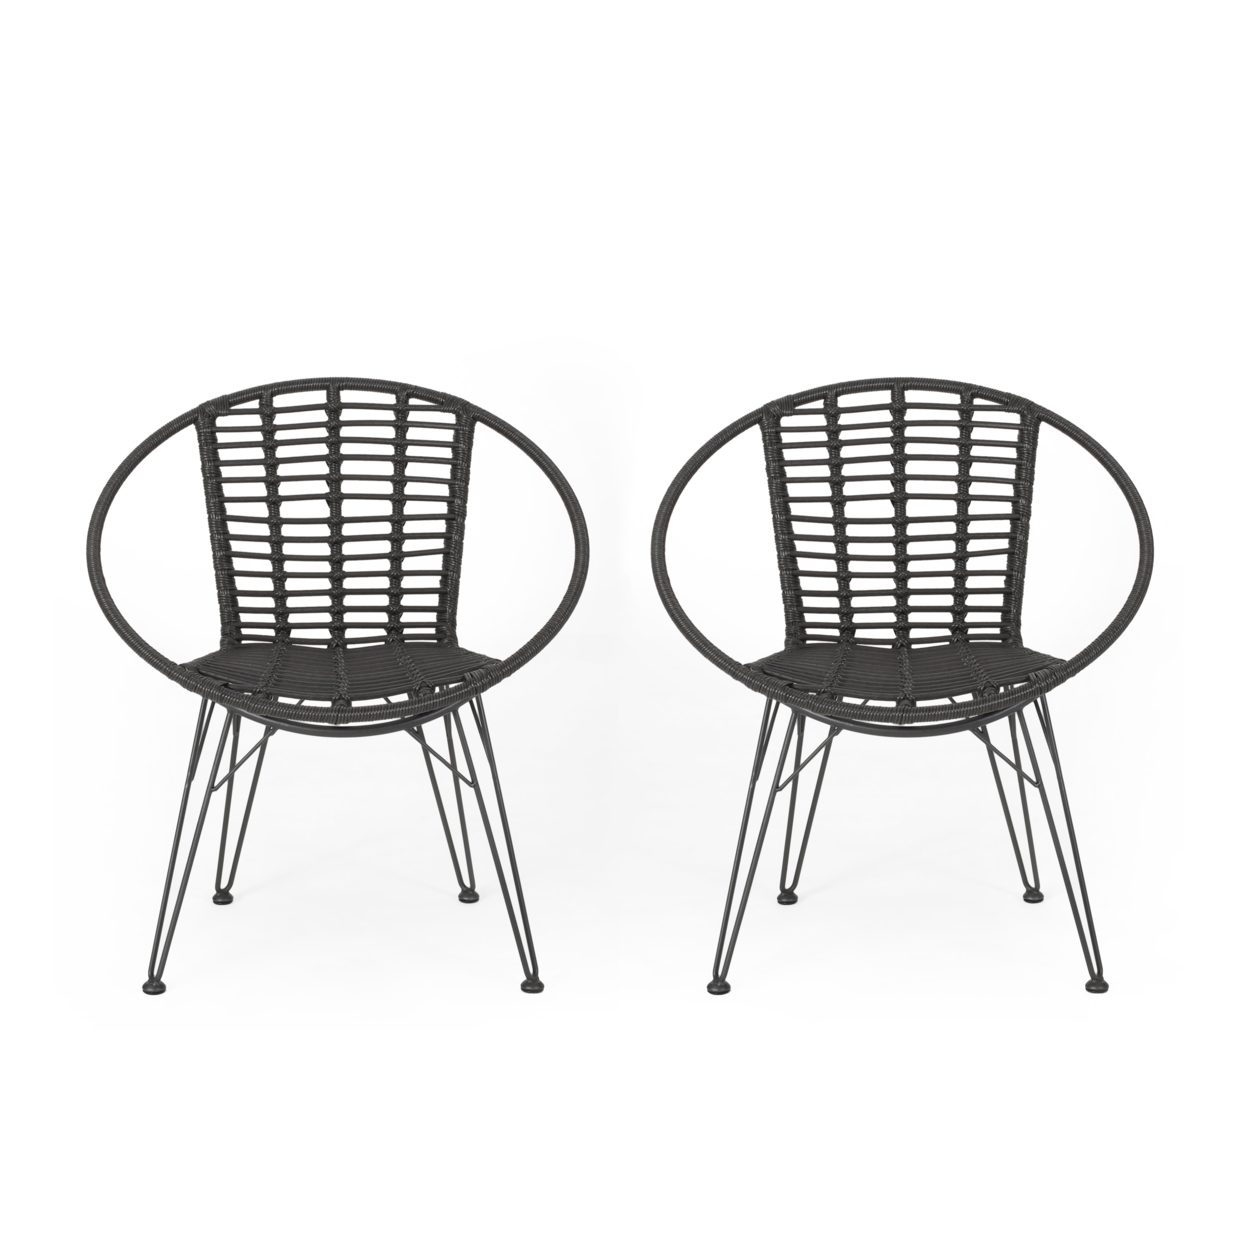 Winnie Outdoor Wicker Dining Chairs (Set Of 2) - Gray, Black